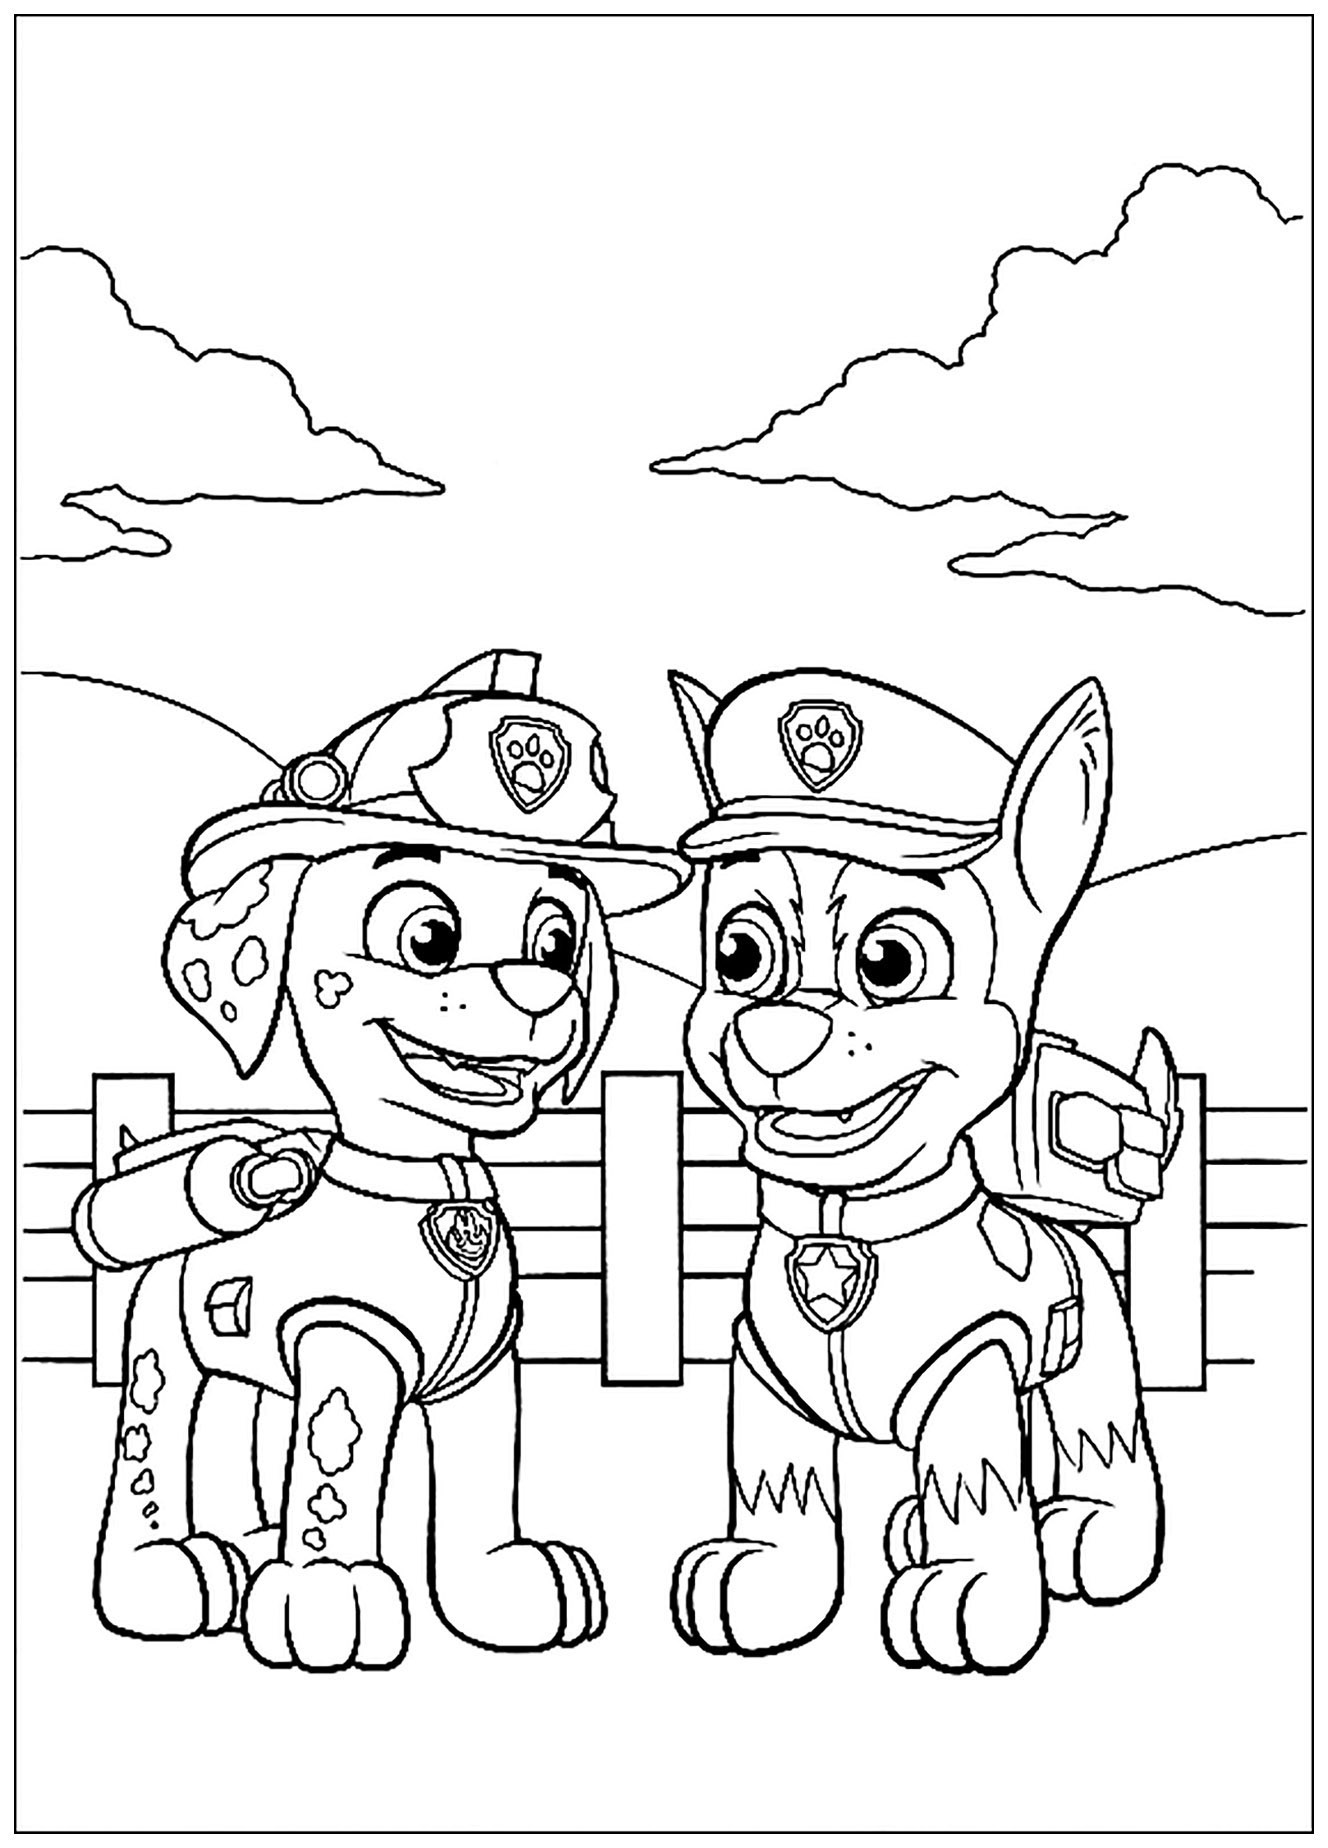 Paw Patrol Coloring Pages FREE Printable 94